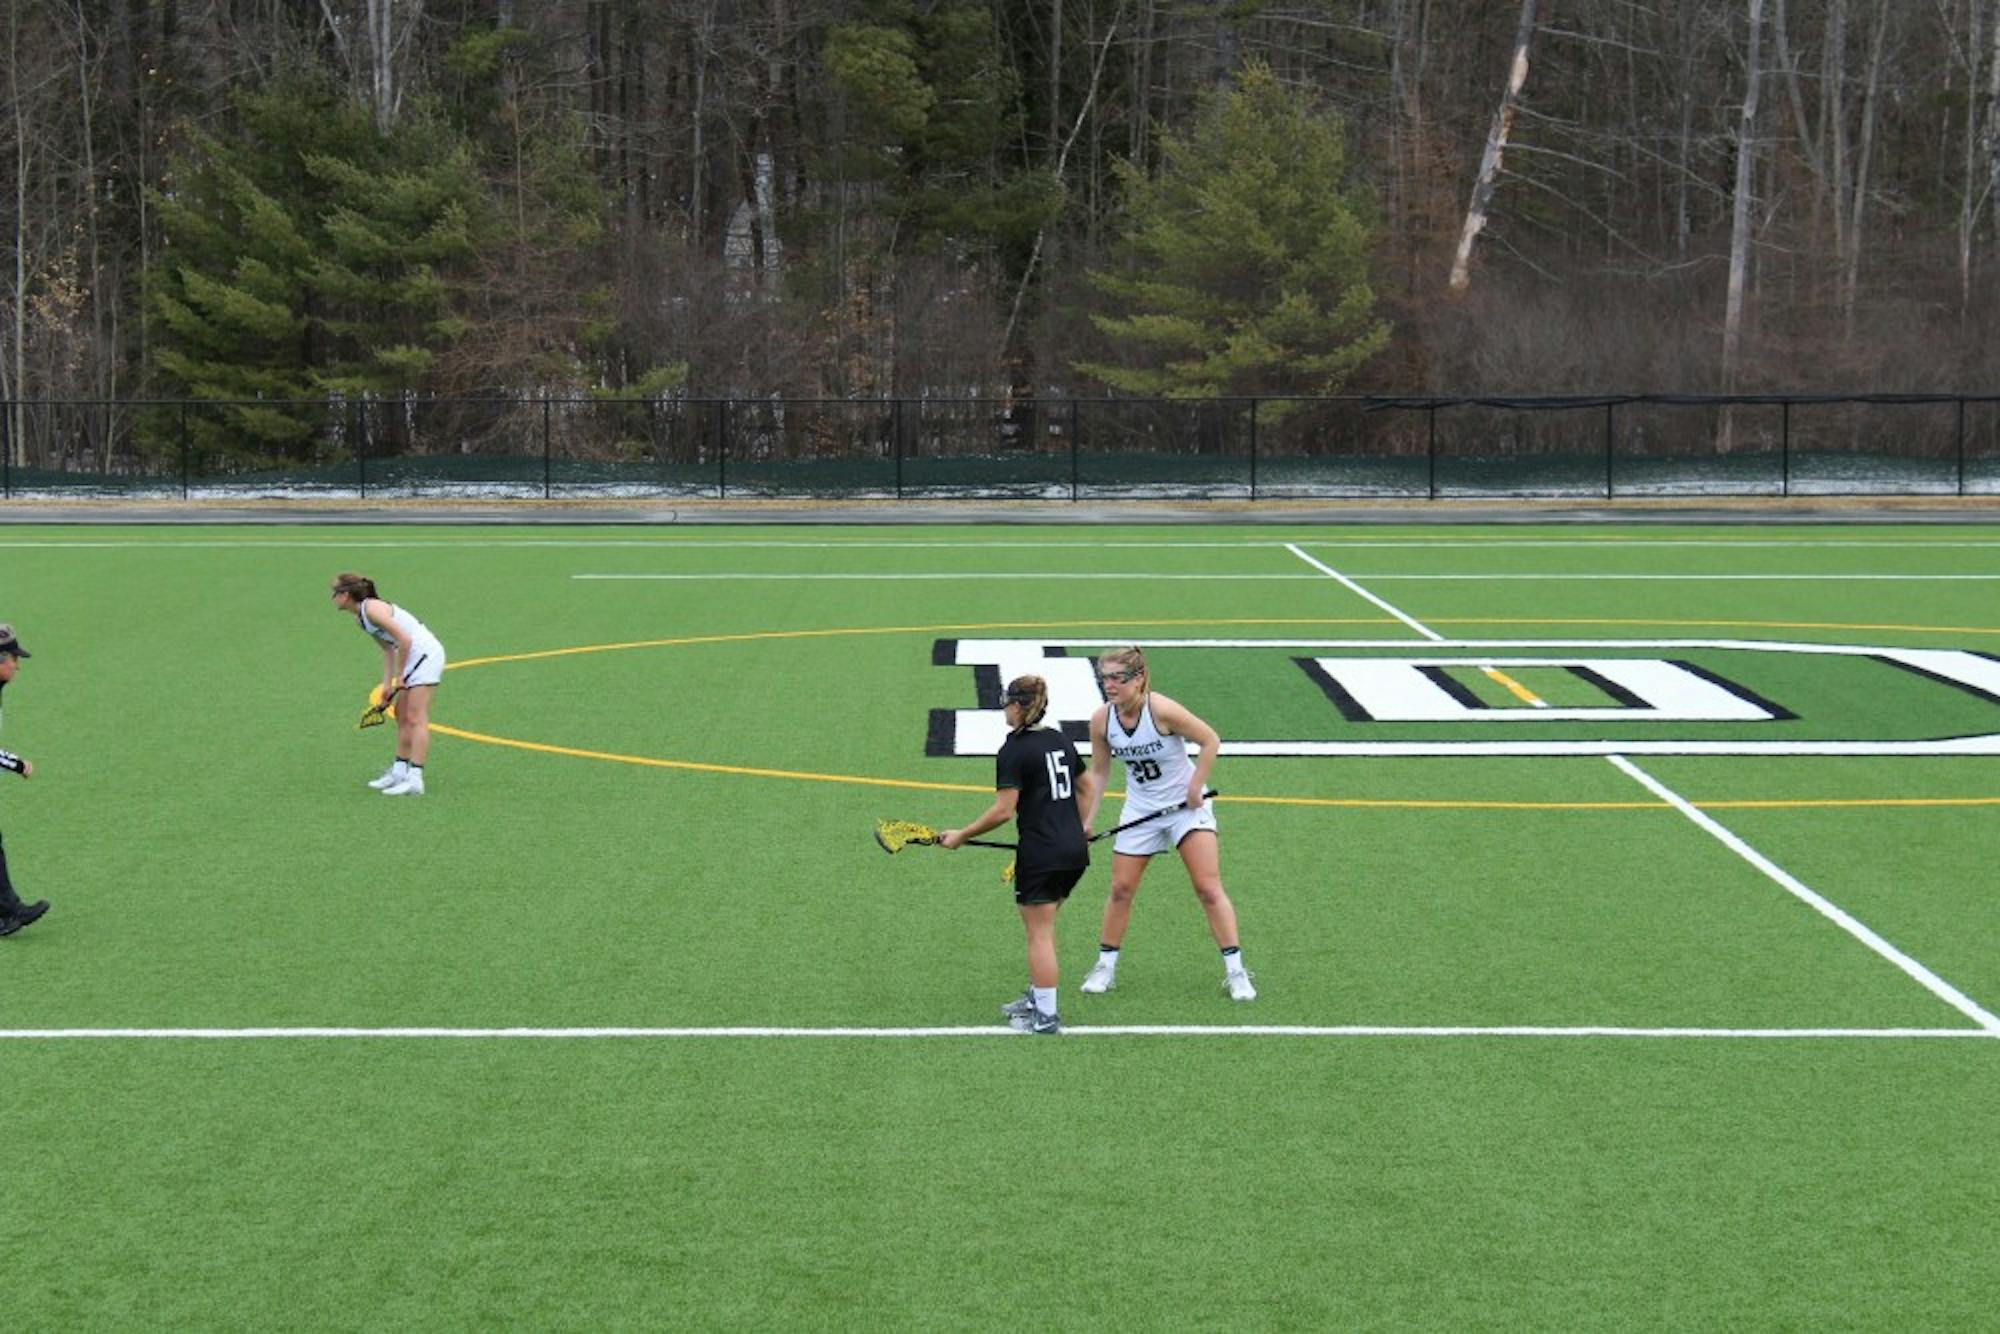 Ellie Carson ’20 leads the Big Green in scoring with 24 goals and 7 assists.